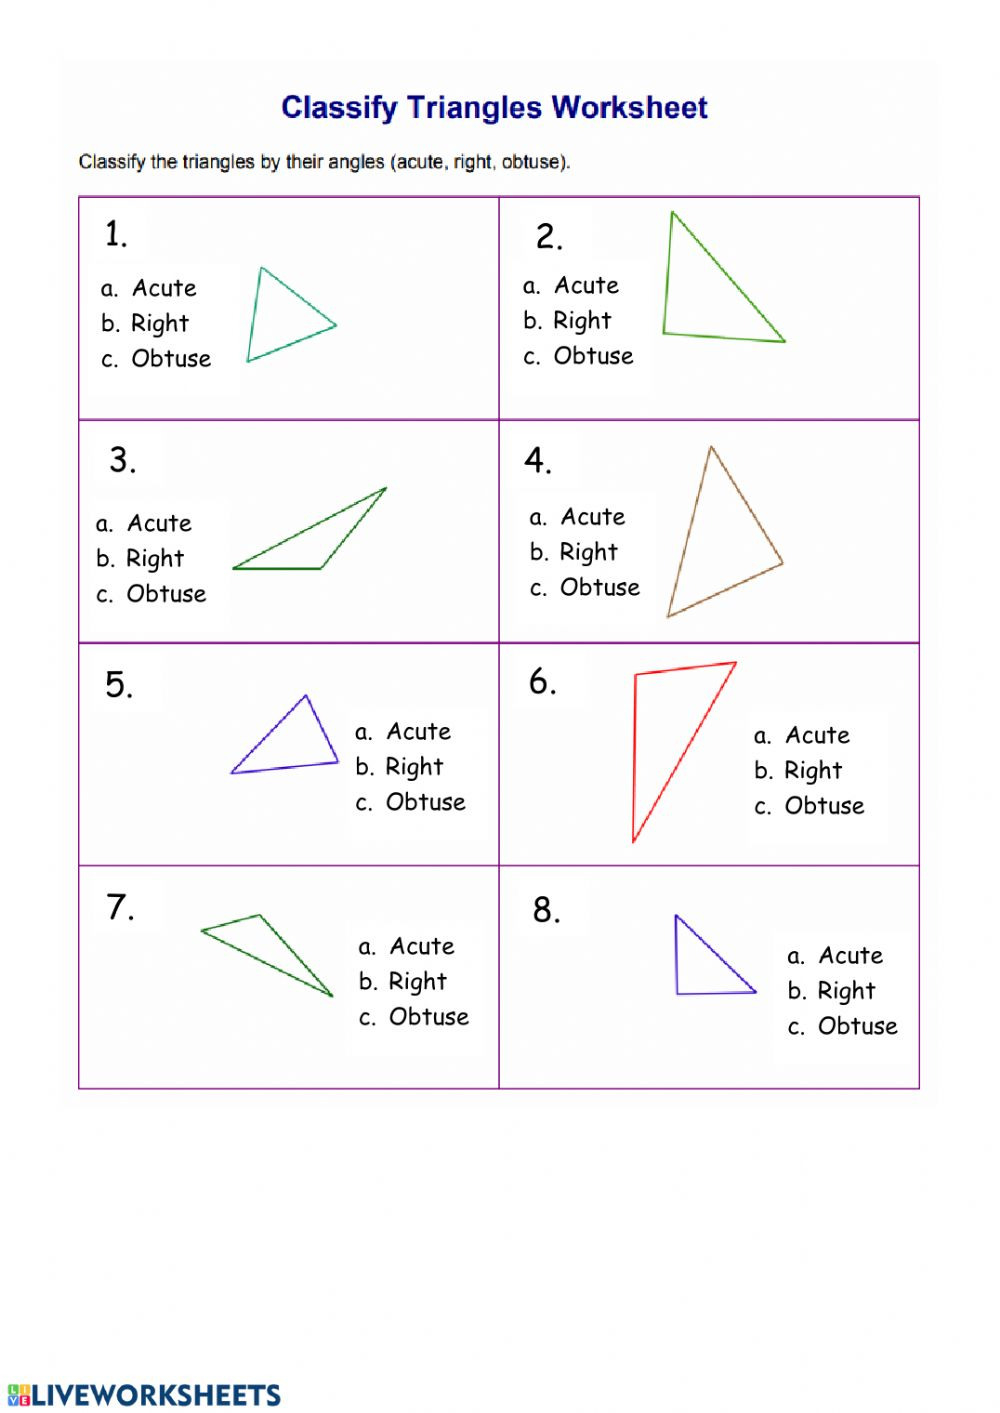 classifying-triangles-worksheet-with-answer-key-db-excel